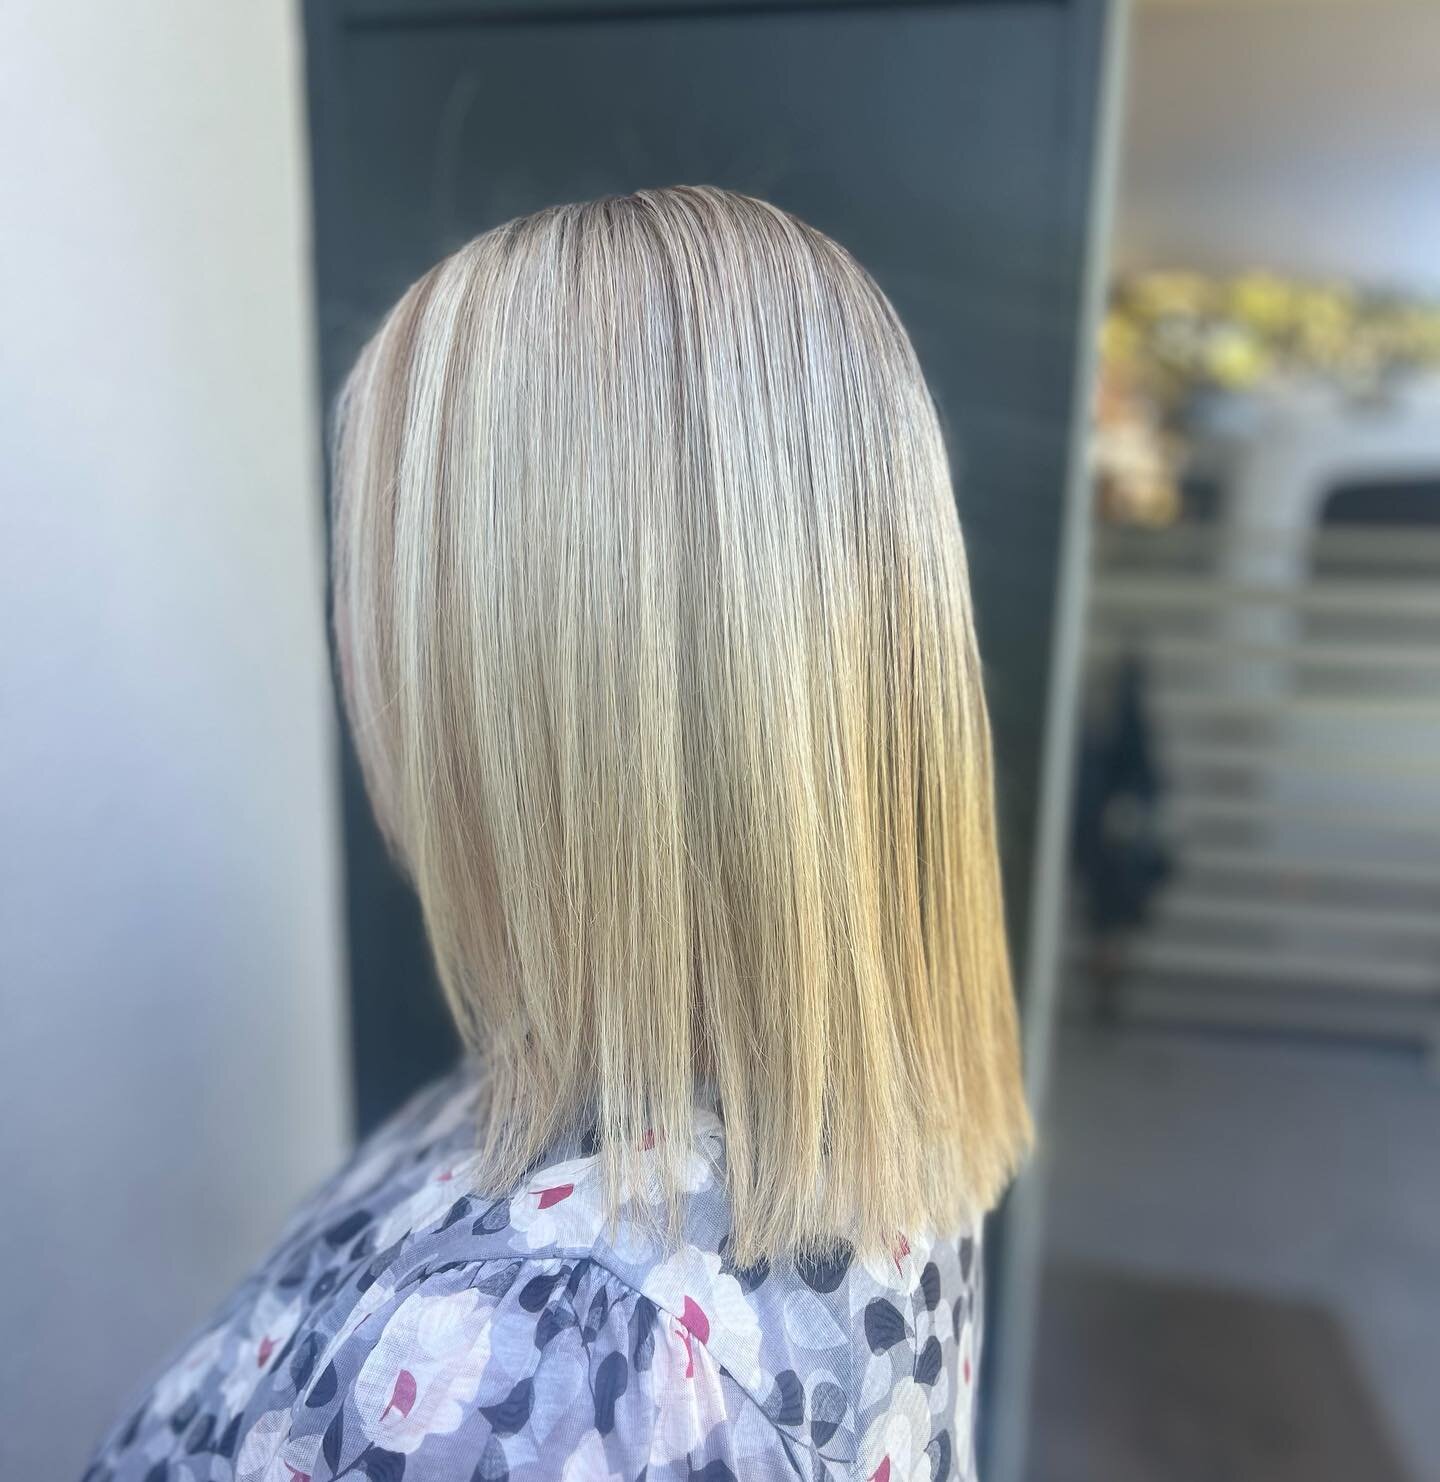 Blonde highlights &amp; fine beige lowlights by Flick to create this beautiful natural blonde! 😍
Book your next appointment at hairflicks.com or DM us 👌🏼

#toowoonbay #centralcoasthairdresser #blonde #naturalbeauty